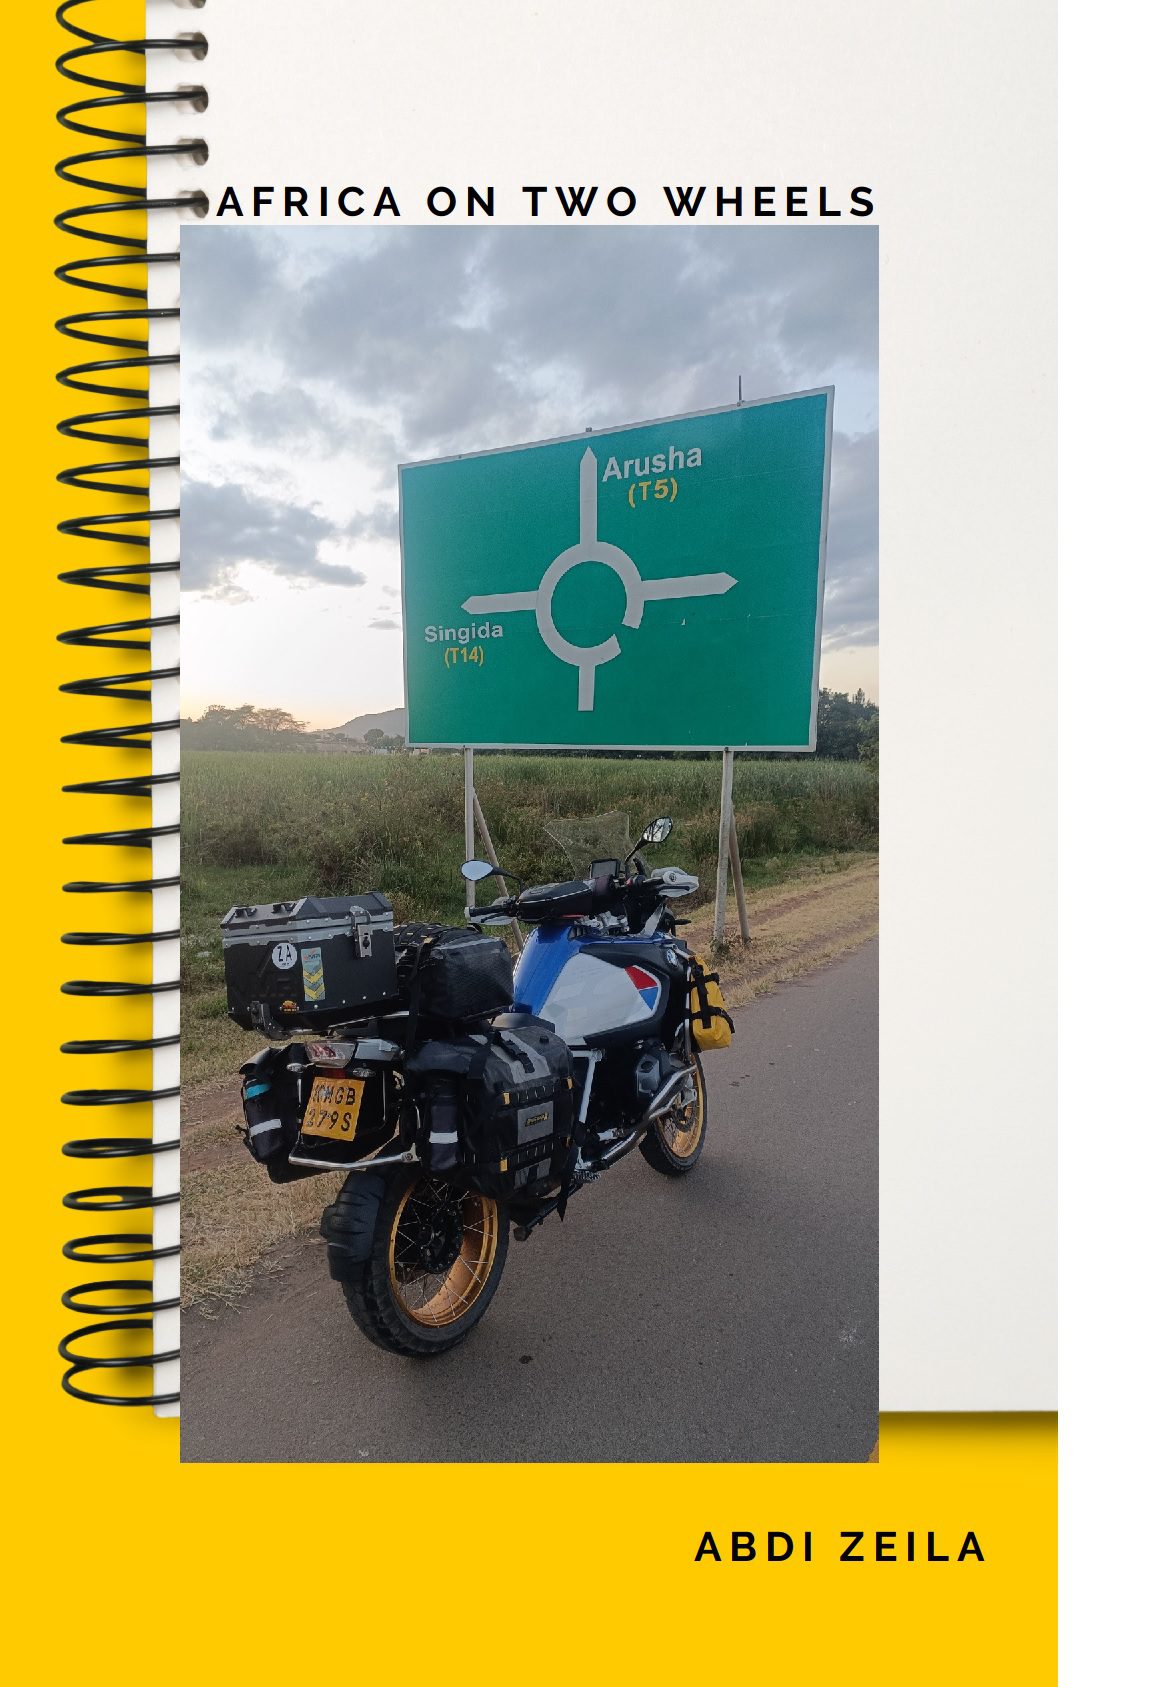 Africa on Two Wheels Book Cover